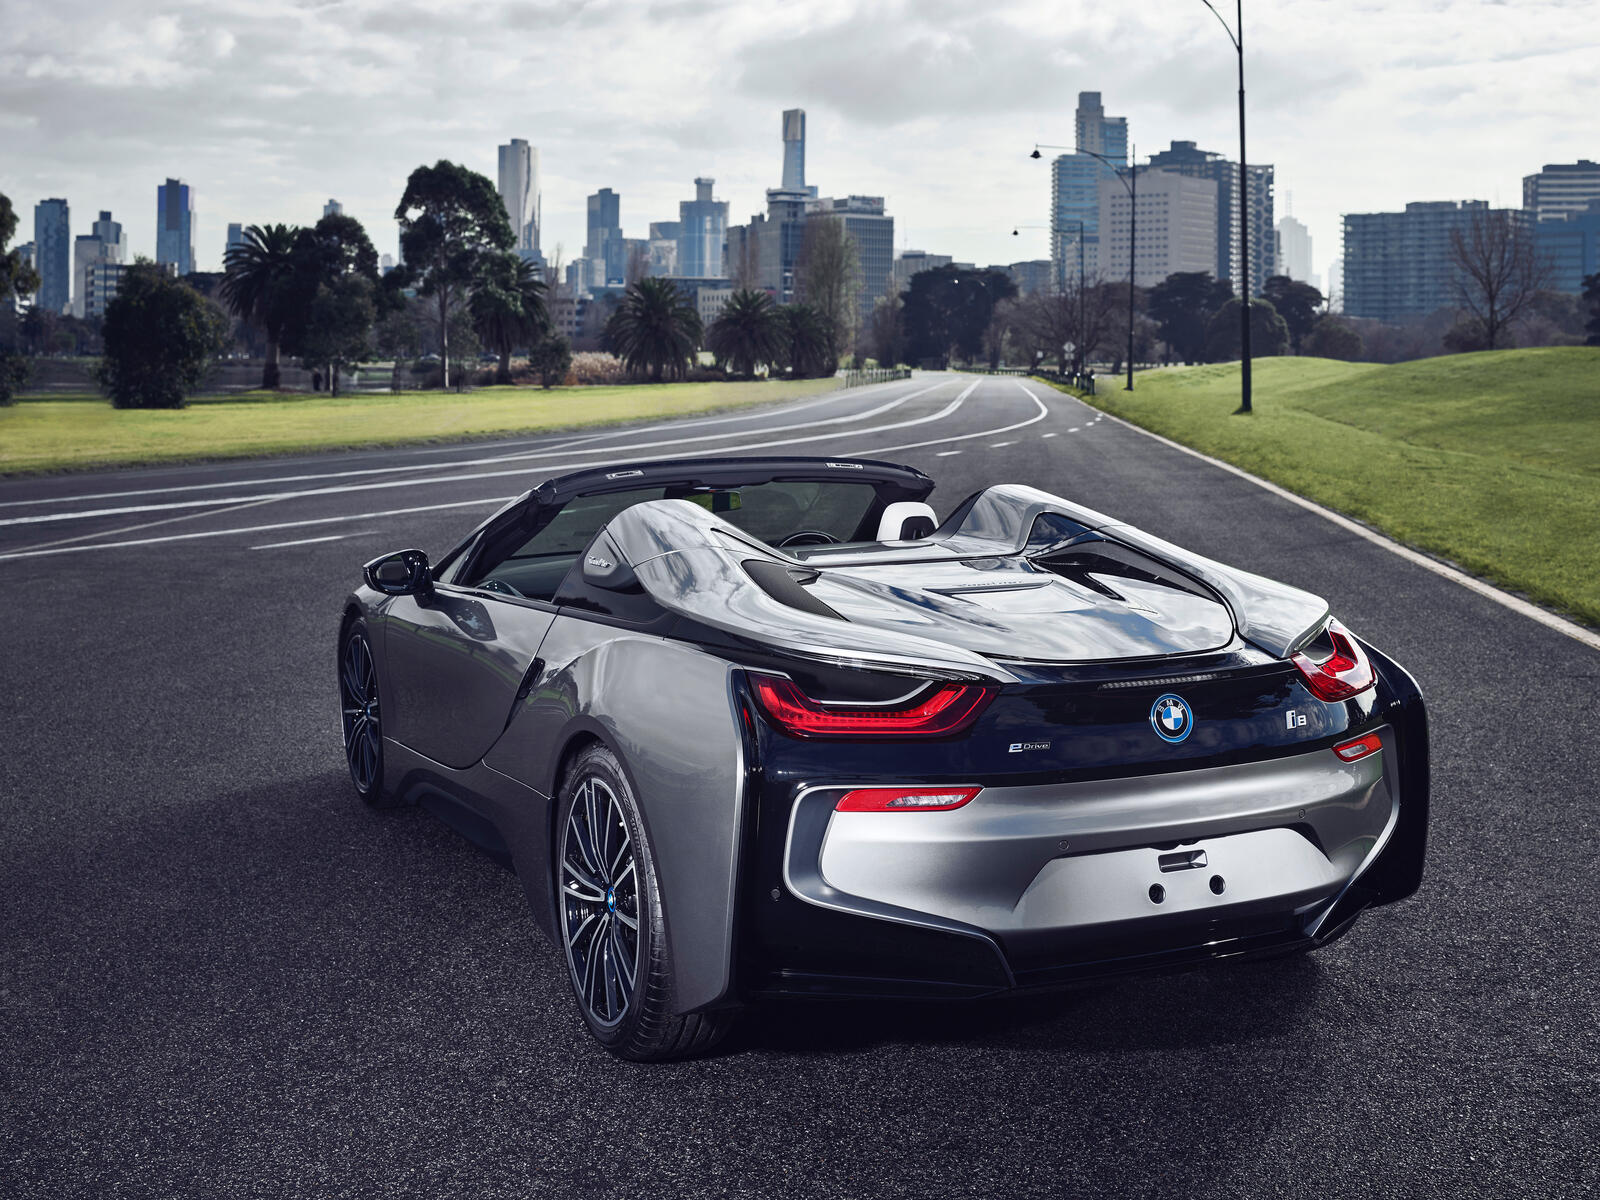 Wallpapers BMW I8 BMW cars on the desktop